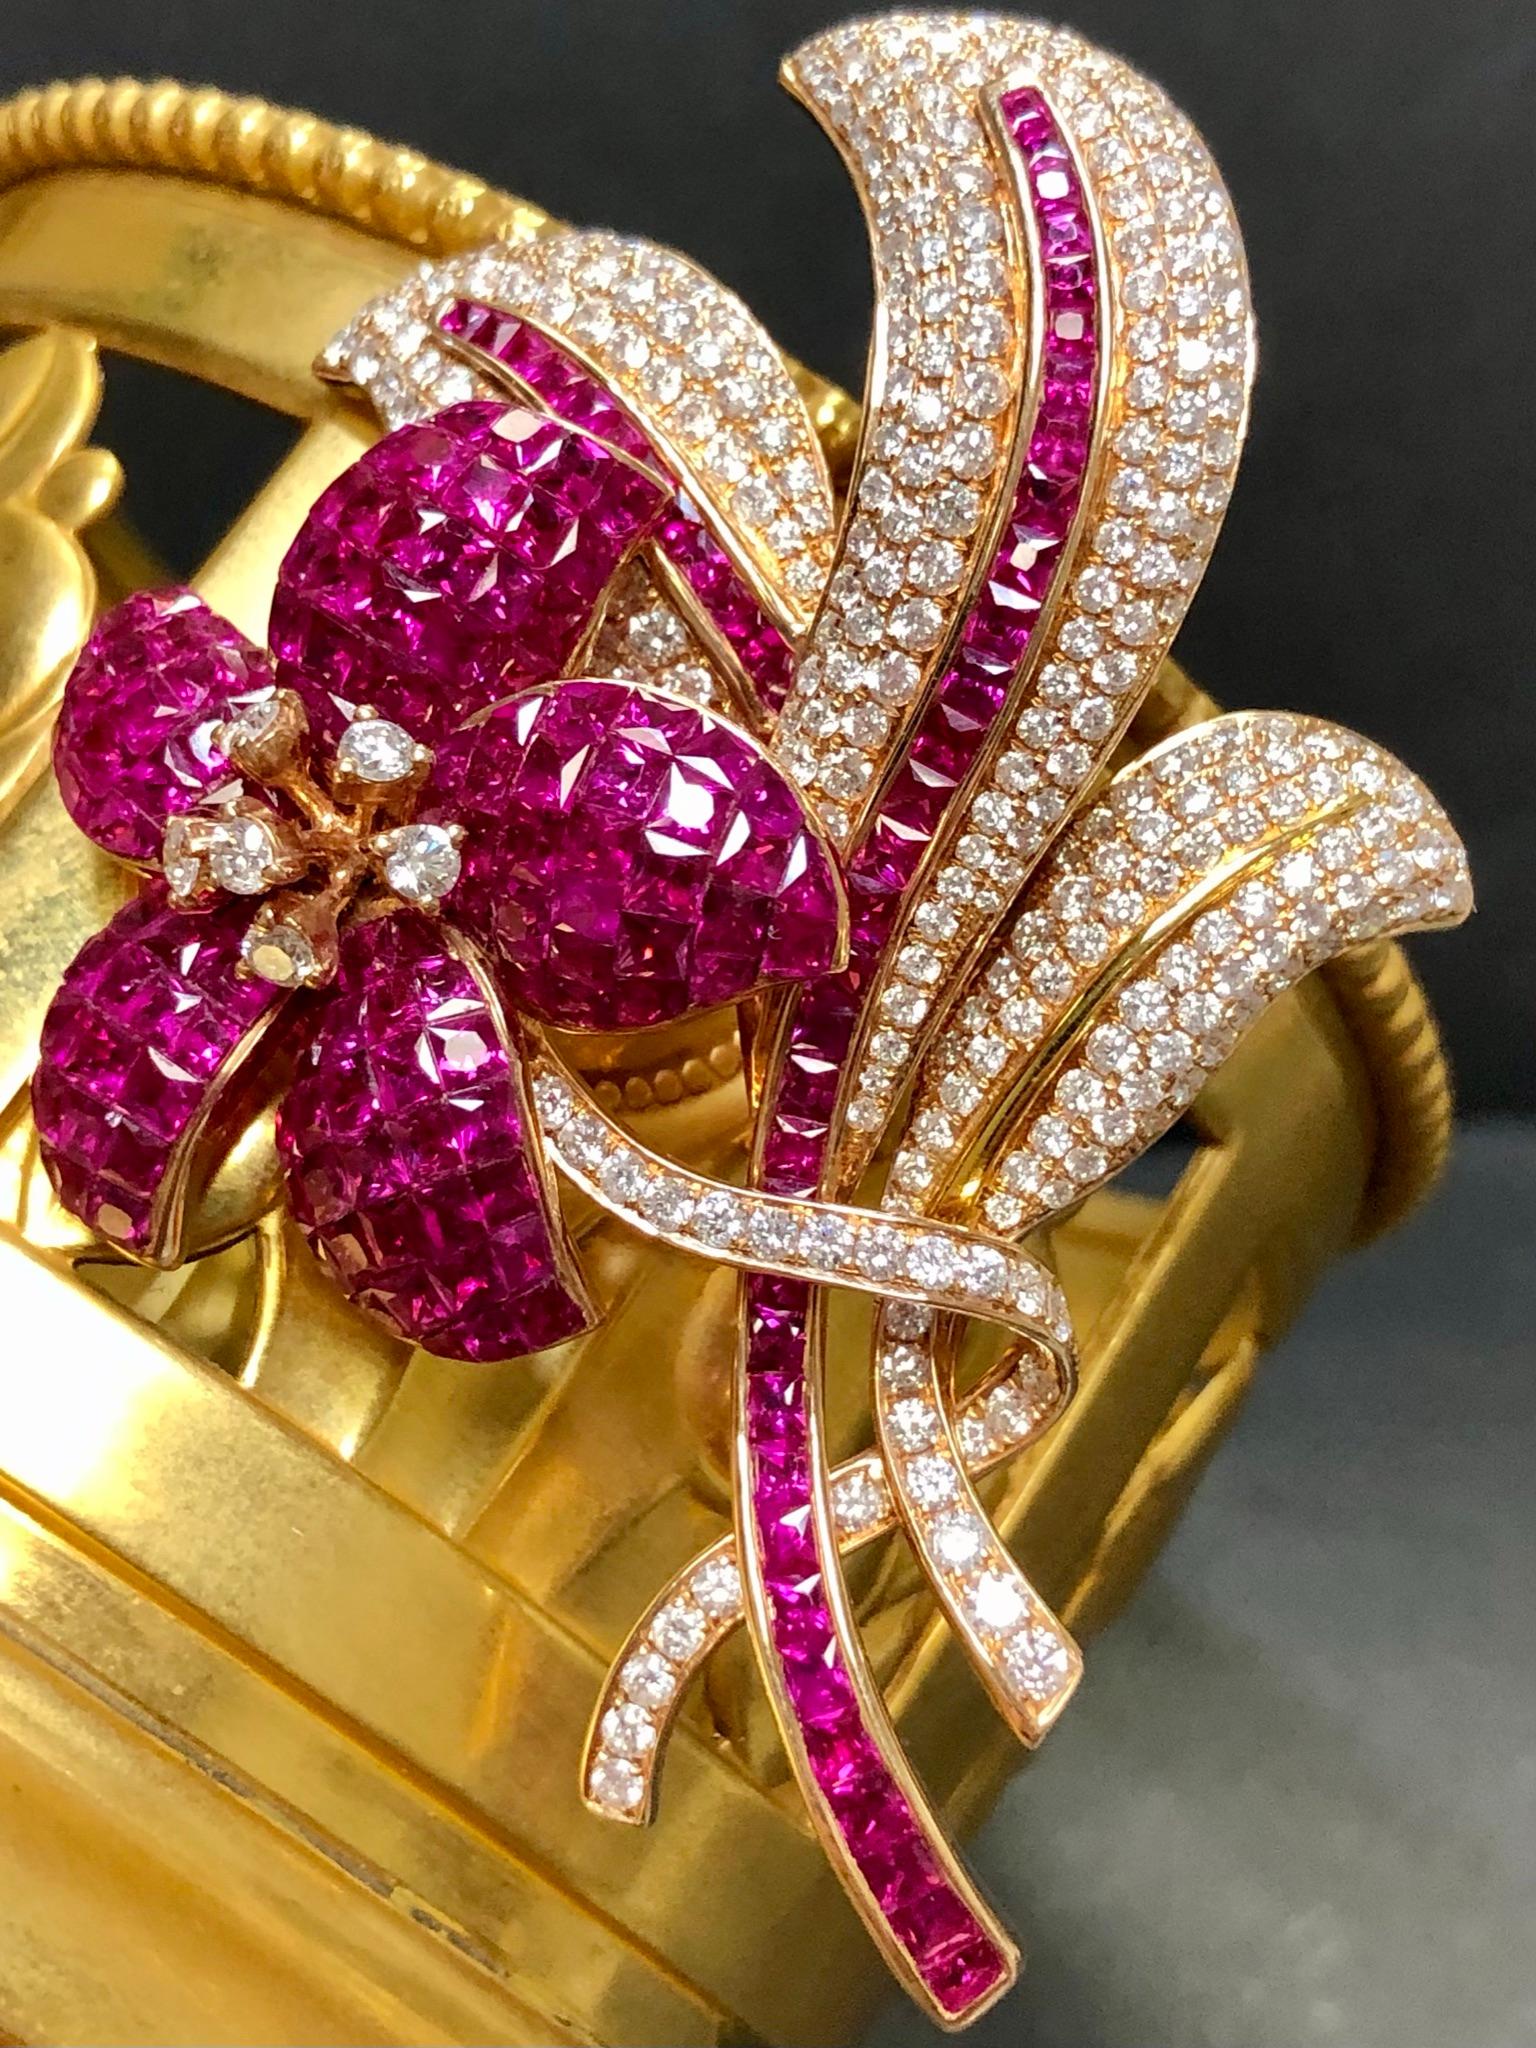 
A beautifully made pin crafted in 18K rose gold set with approximately 5.30cttw in G-I color Si1-i1 clarity round super bright and lively diamonds as well as approximately 15cttw in beautifully bright, natural red rubies. Can be worn as a brooch or